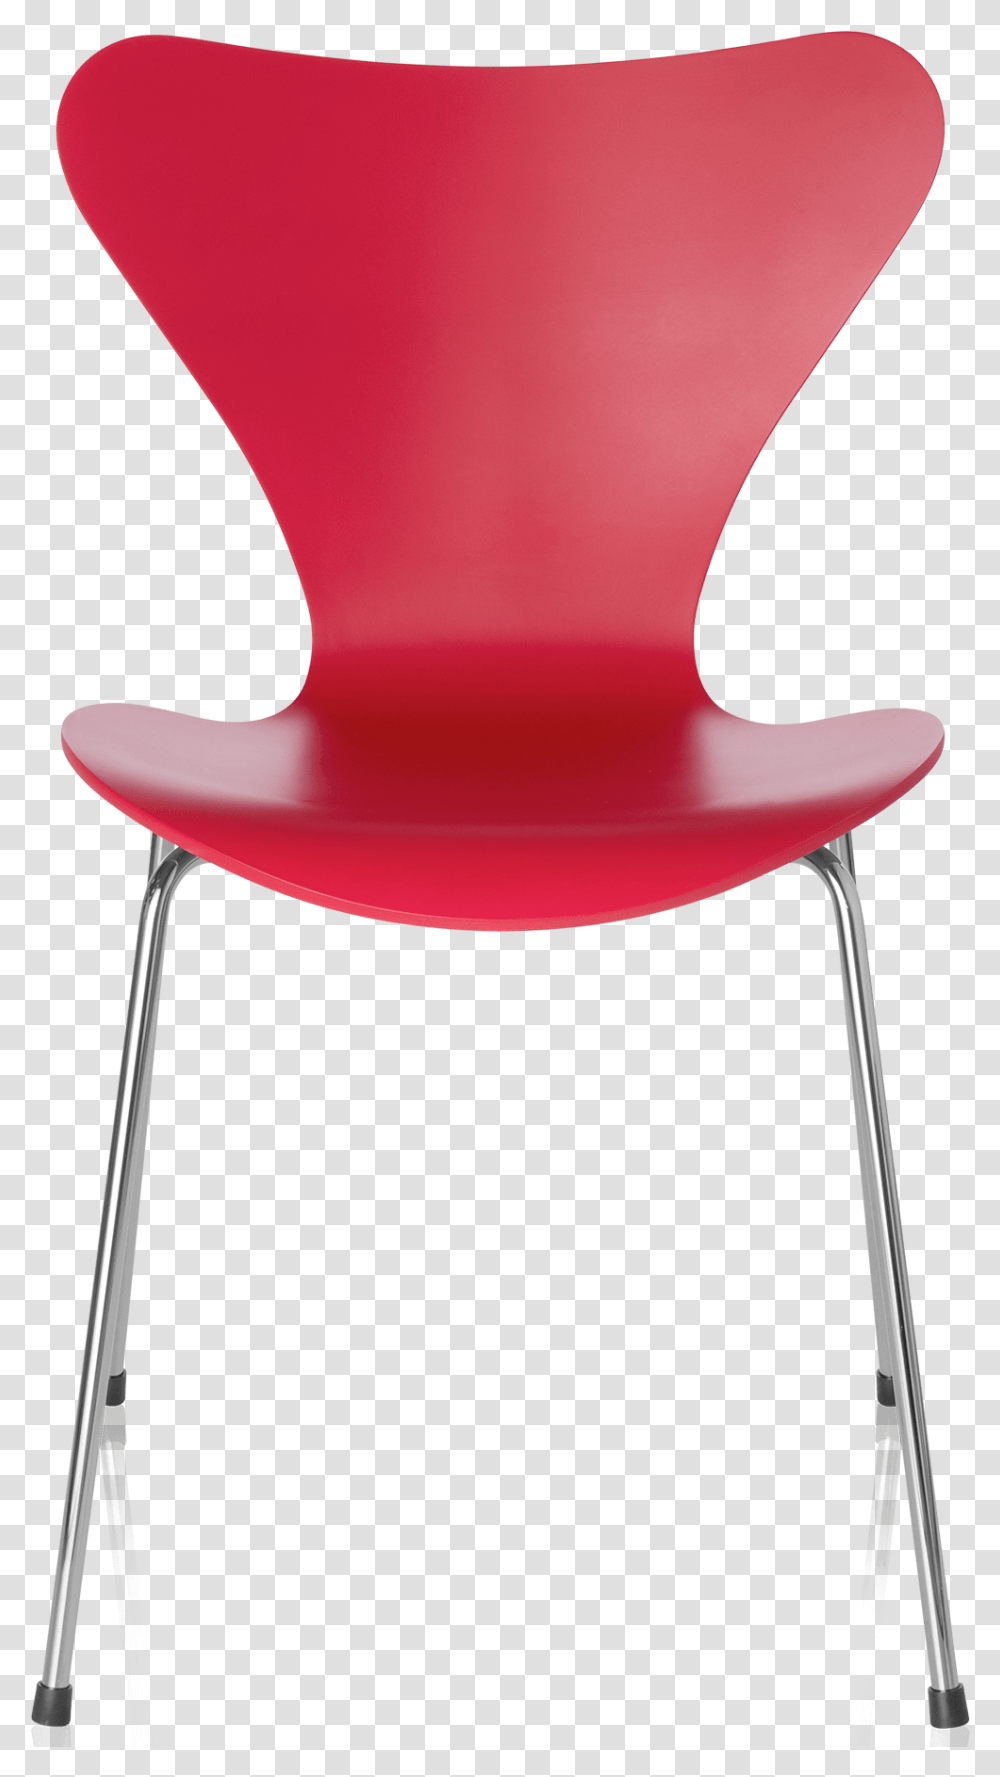 Series 7 Chair Arne Jacobsen Opium Red Lacquered, Furniture, Lamp Transparent Png